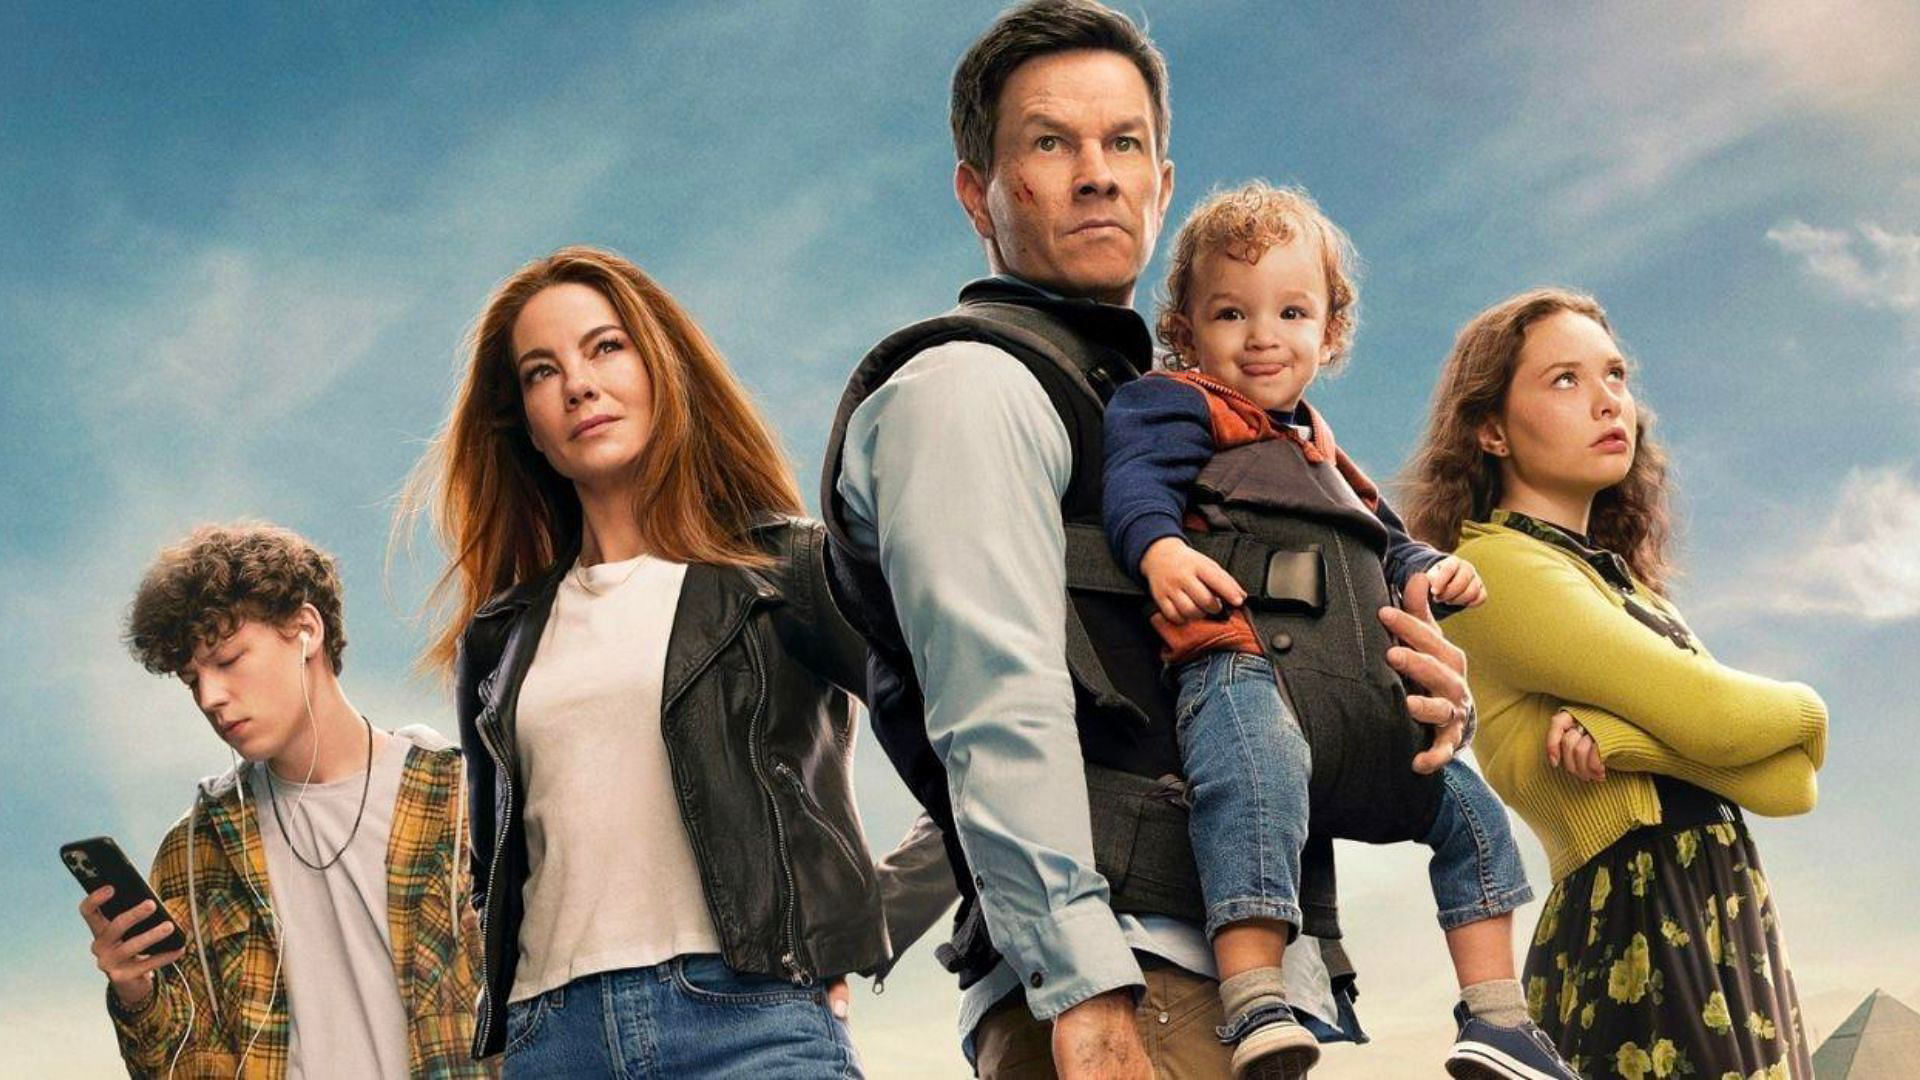 Where to watch Mark Wahlberg's The Family Plan? Streaming options only